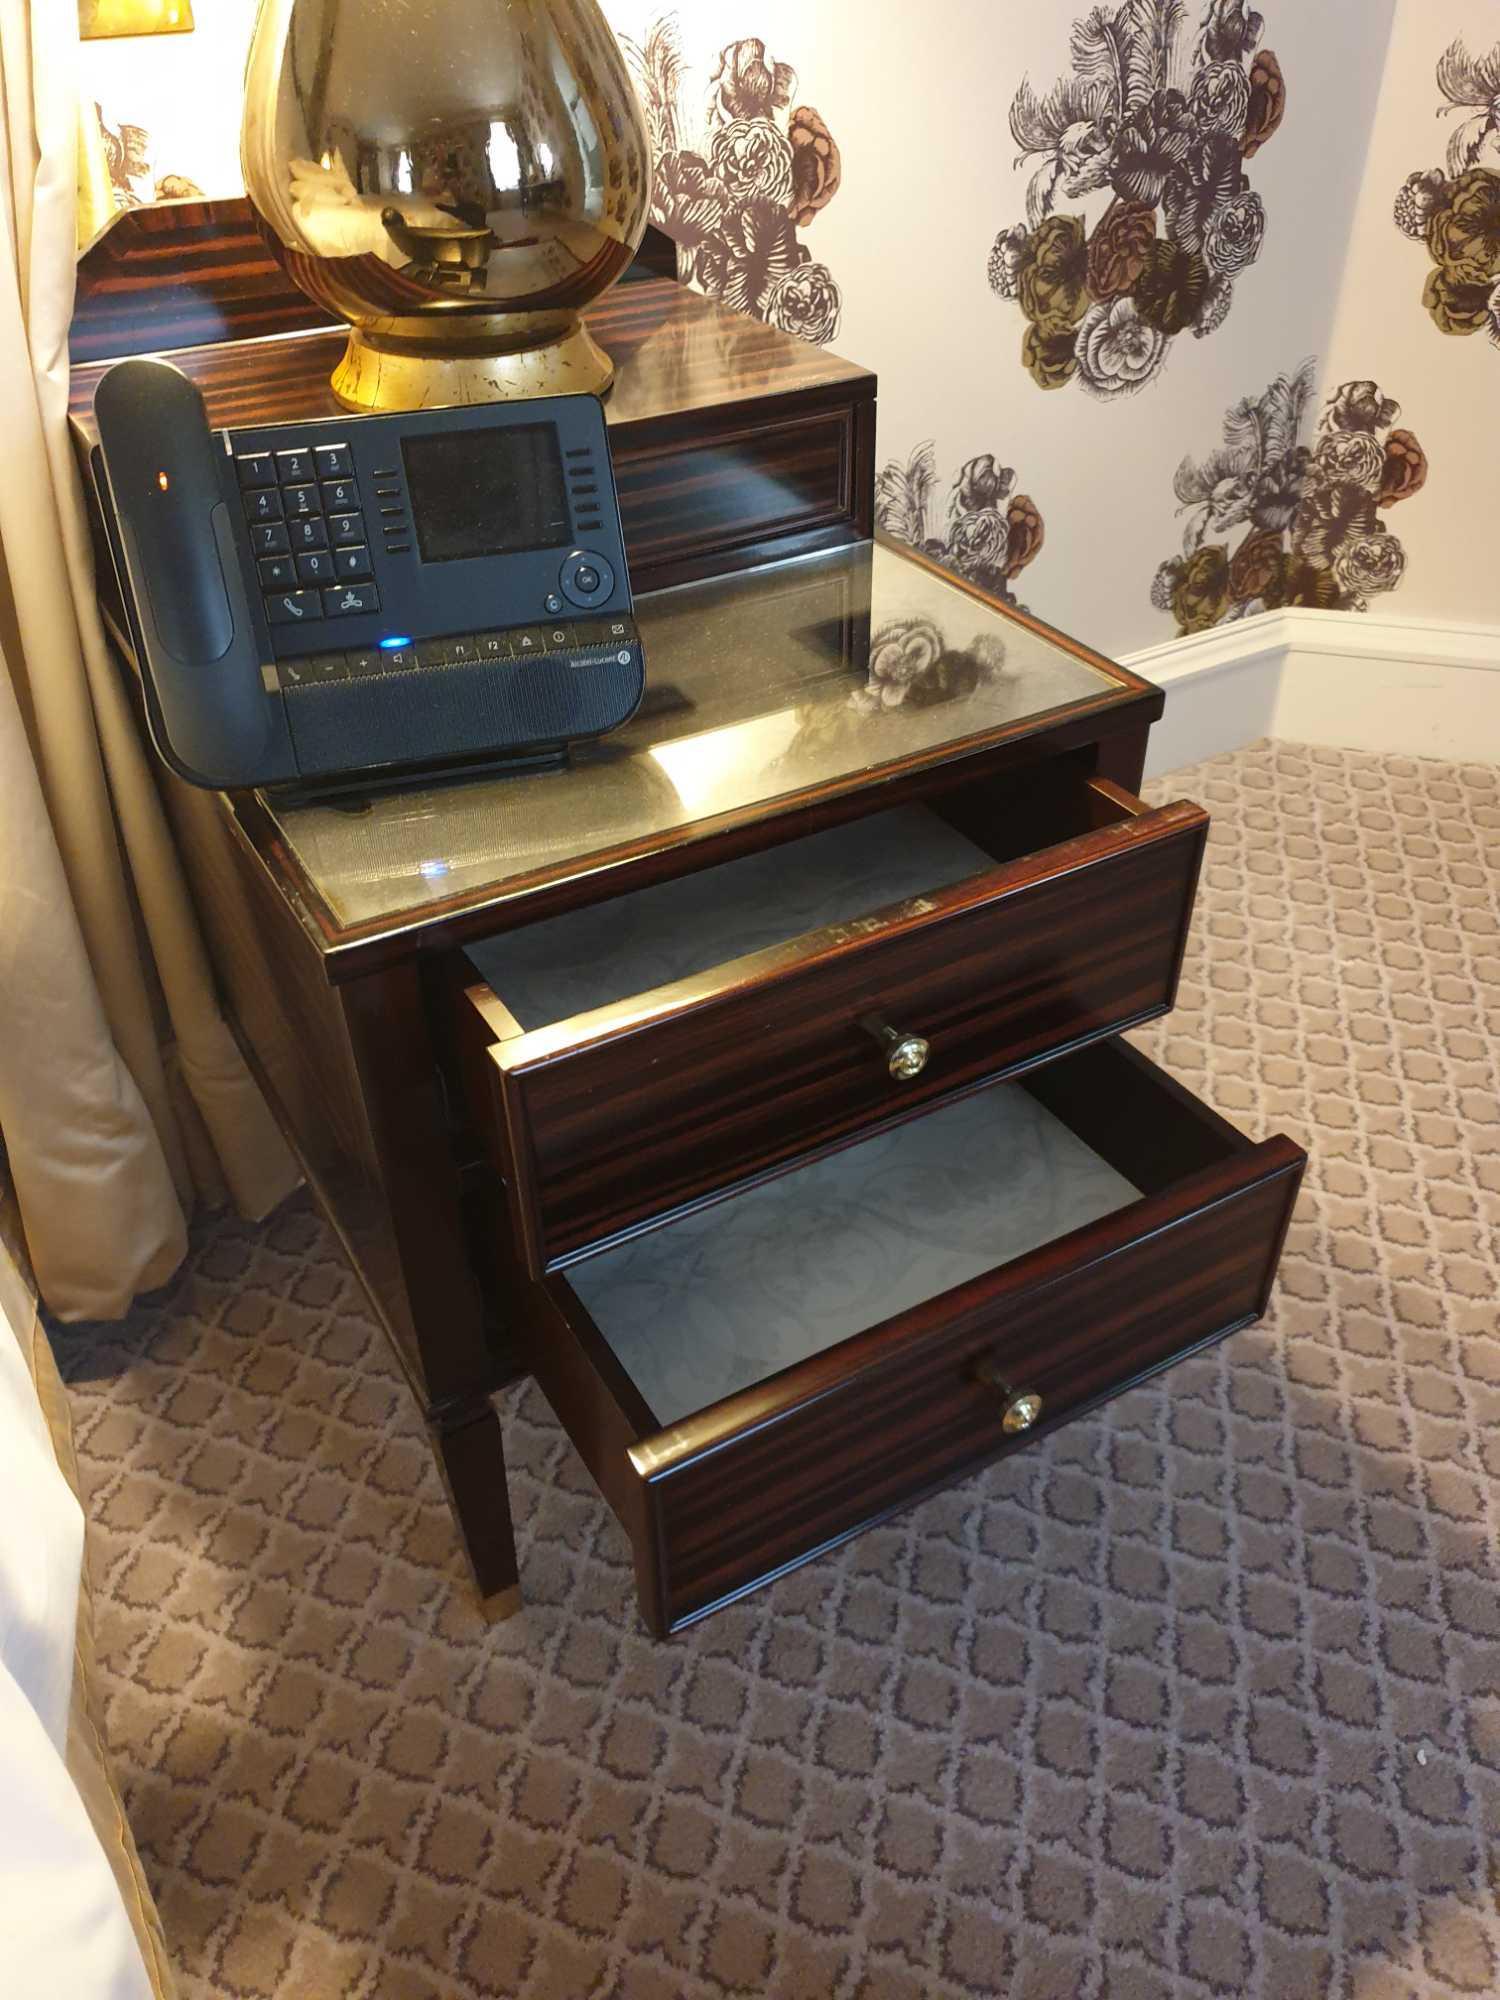 A Pair Of Two Tier Bedside Nightstands With Antiqued Plate Top With Storage Compartments Mounted - Image 2 of 3